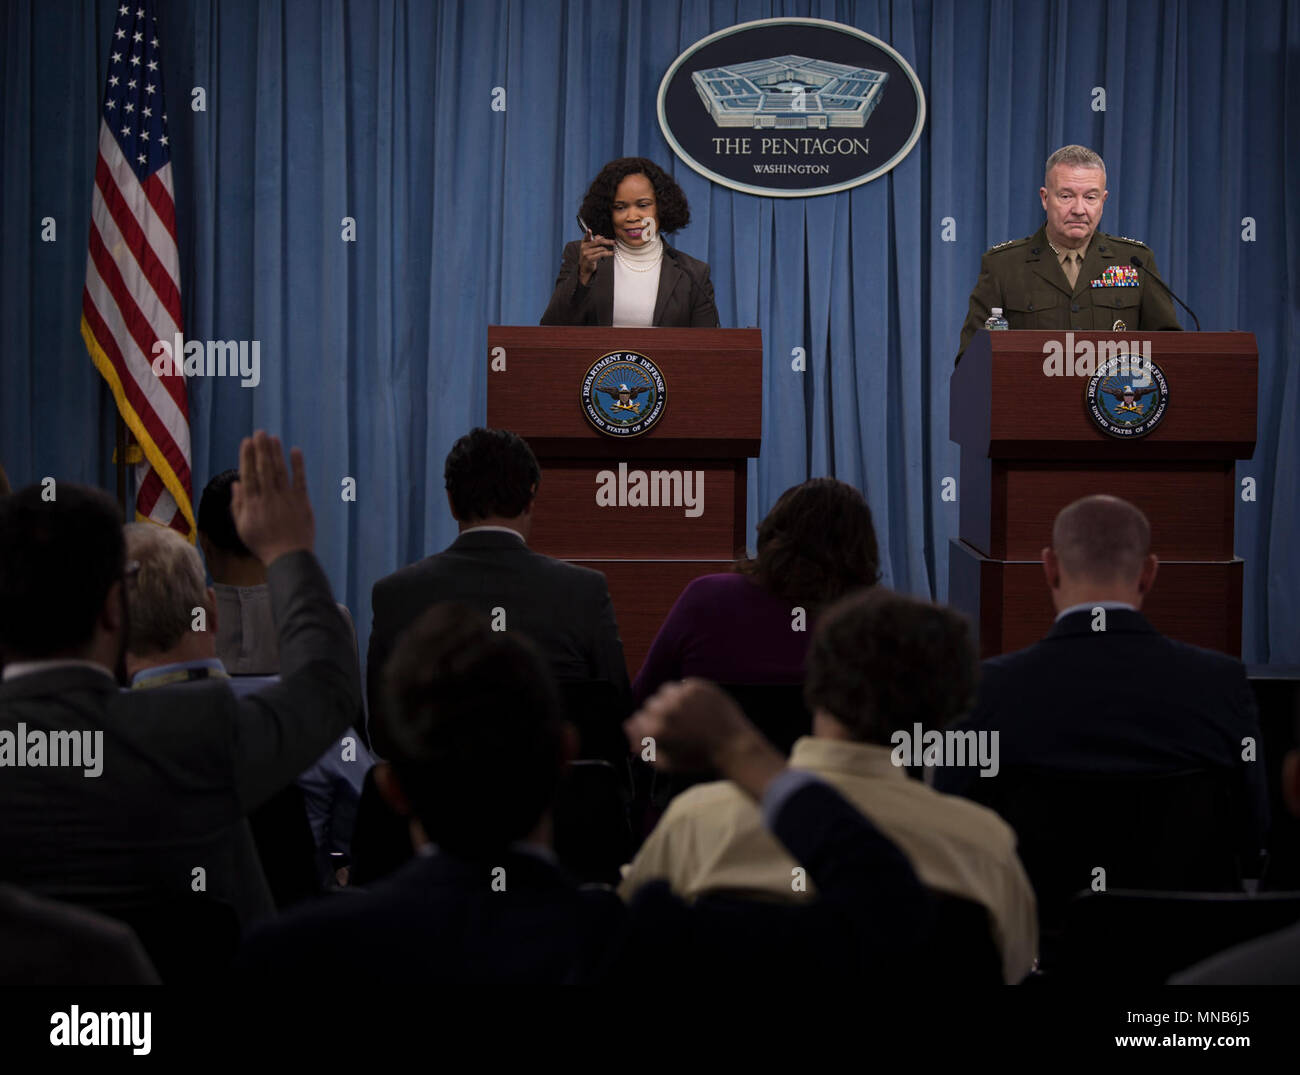 Dana White, the assistant to the secretary of defense for public affairs, and Lt. Gen. Kenneth F. McKenzie, the Joint Staff director, brief the press at the Pentagon in Washington, D.C., March 15, 2018. (DoD Stock Photo